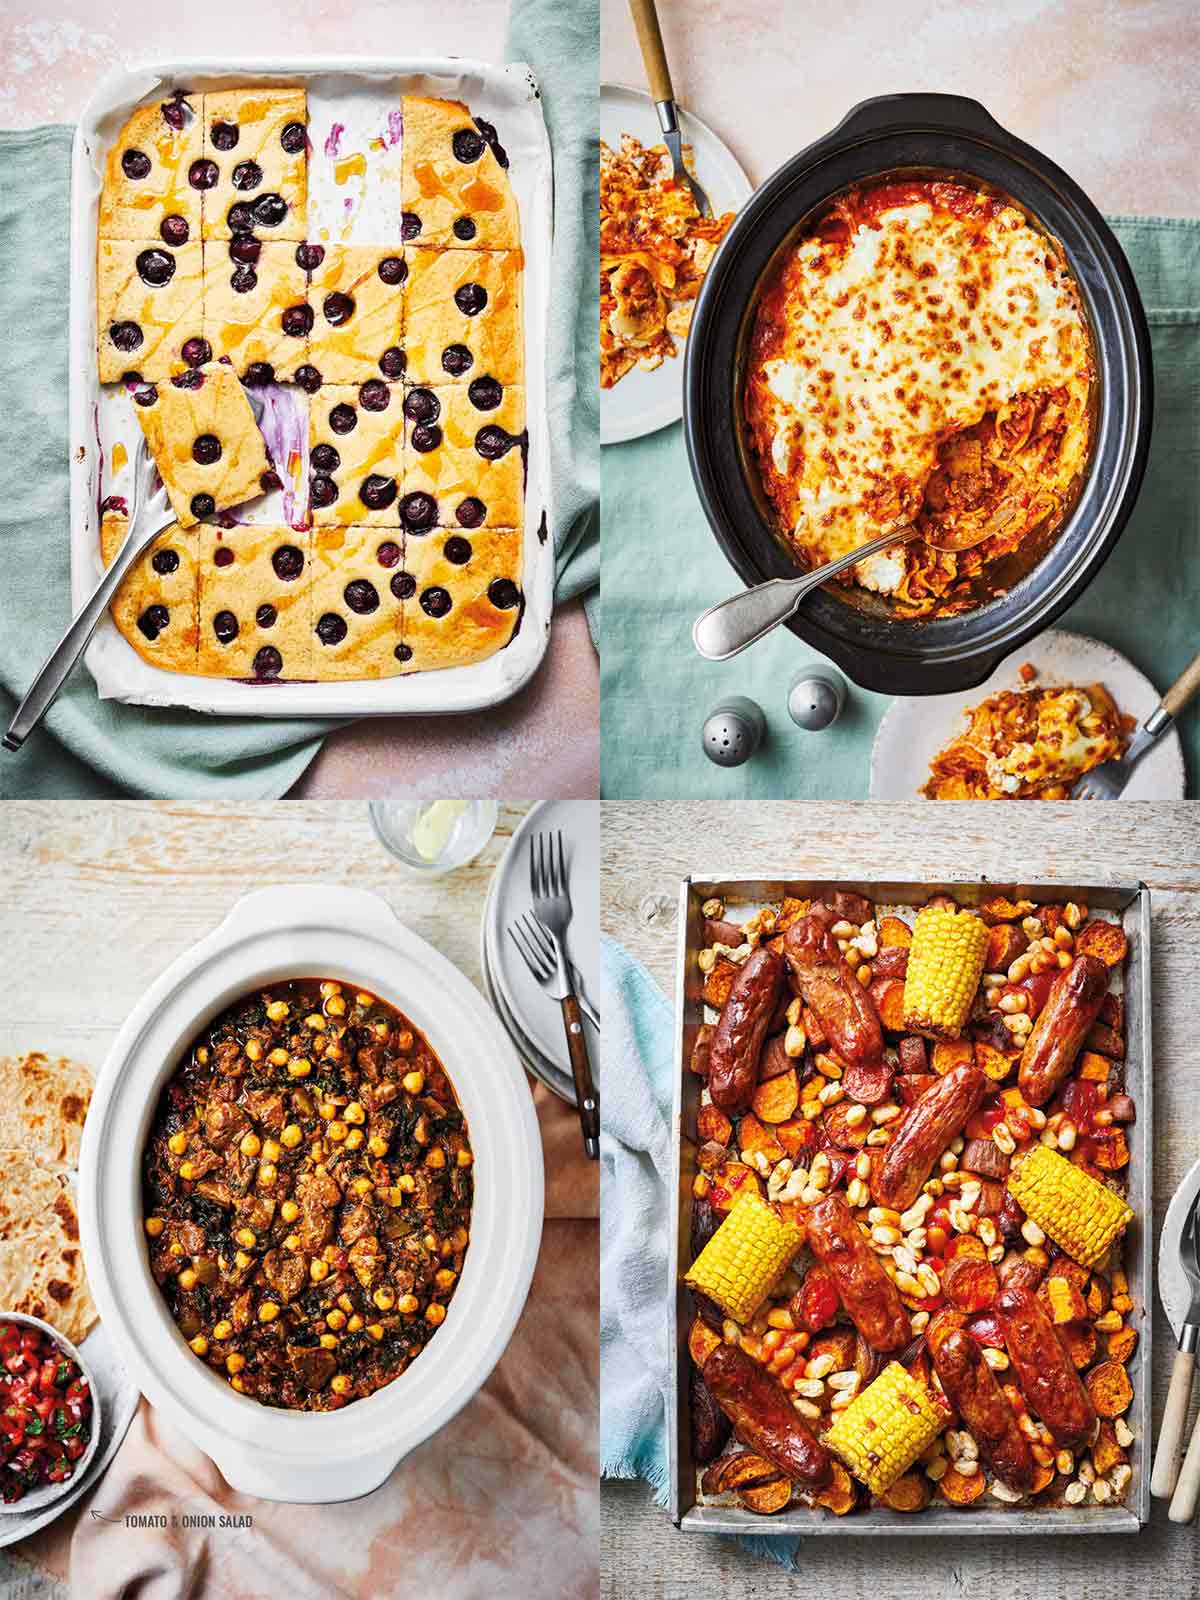 Collage of 4 recipes from the book "what's for dinner in One Pot" by Sarah Rossi.